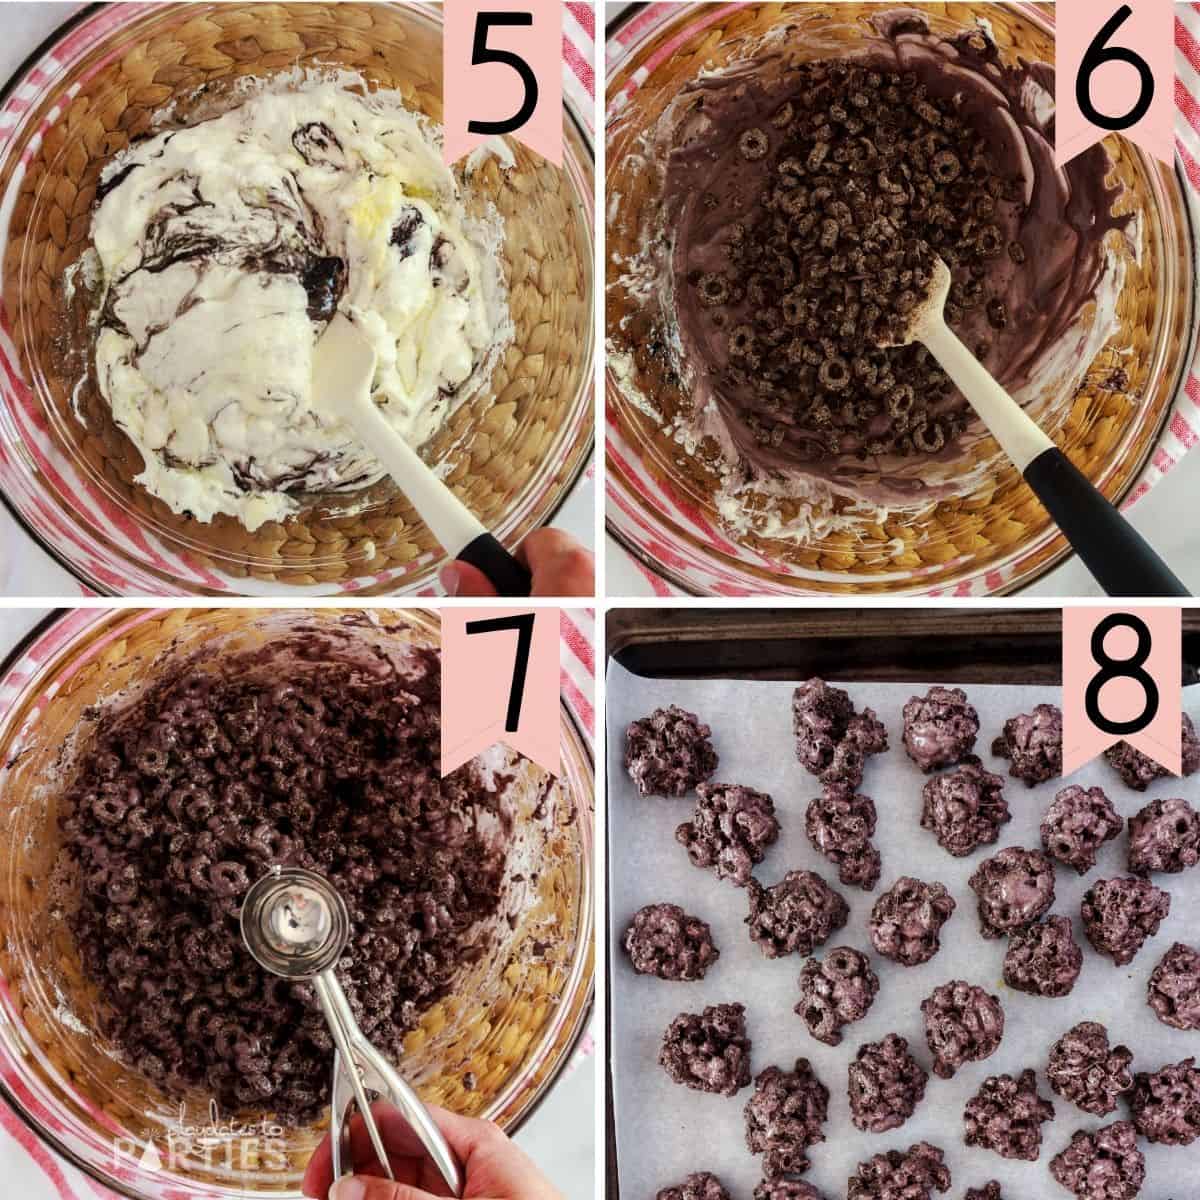 steps 5-8: mixing melted marshmallows, combining marshmallows with the crushed cereal, scooping the cereal mixture, and lumps of coal treats cooling on a tray